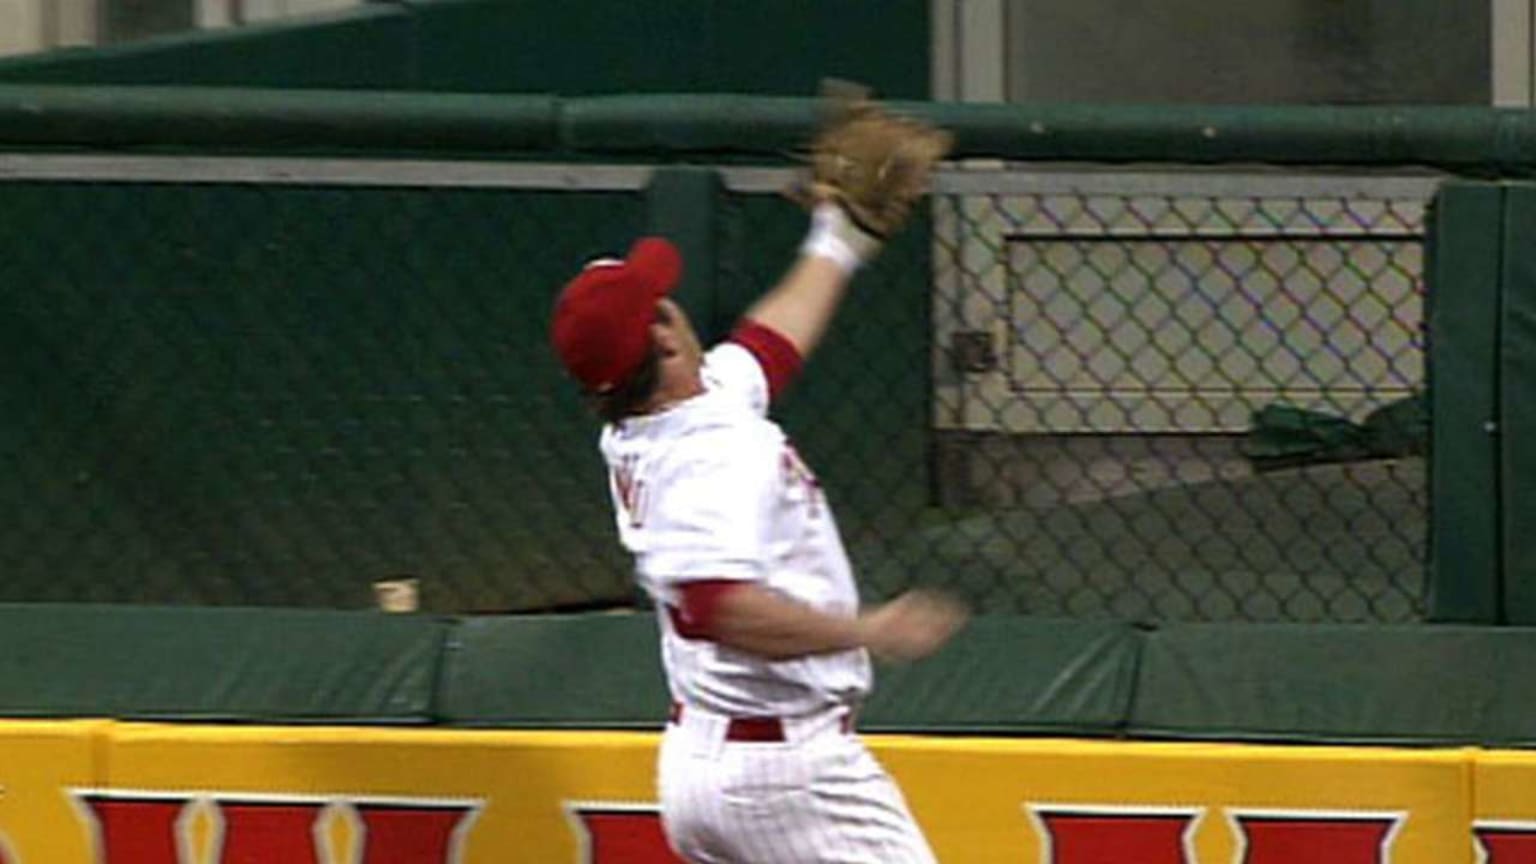 VIDEO: Aaron Rowand Made His Legendary Catch in Center Field for